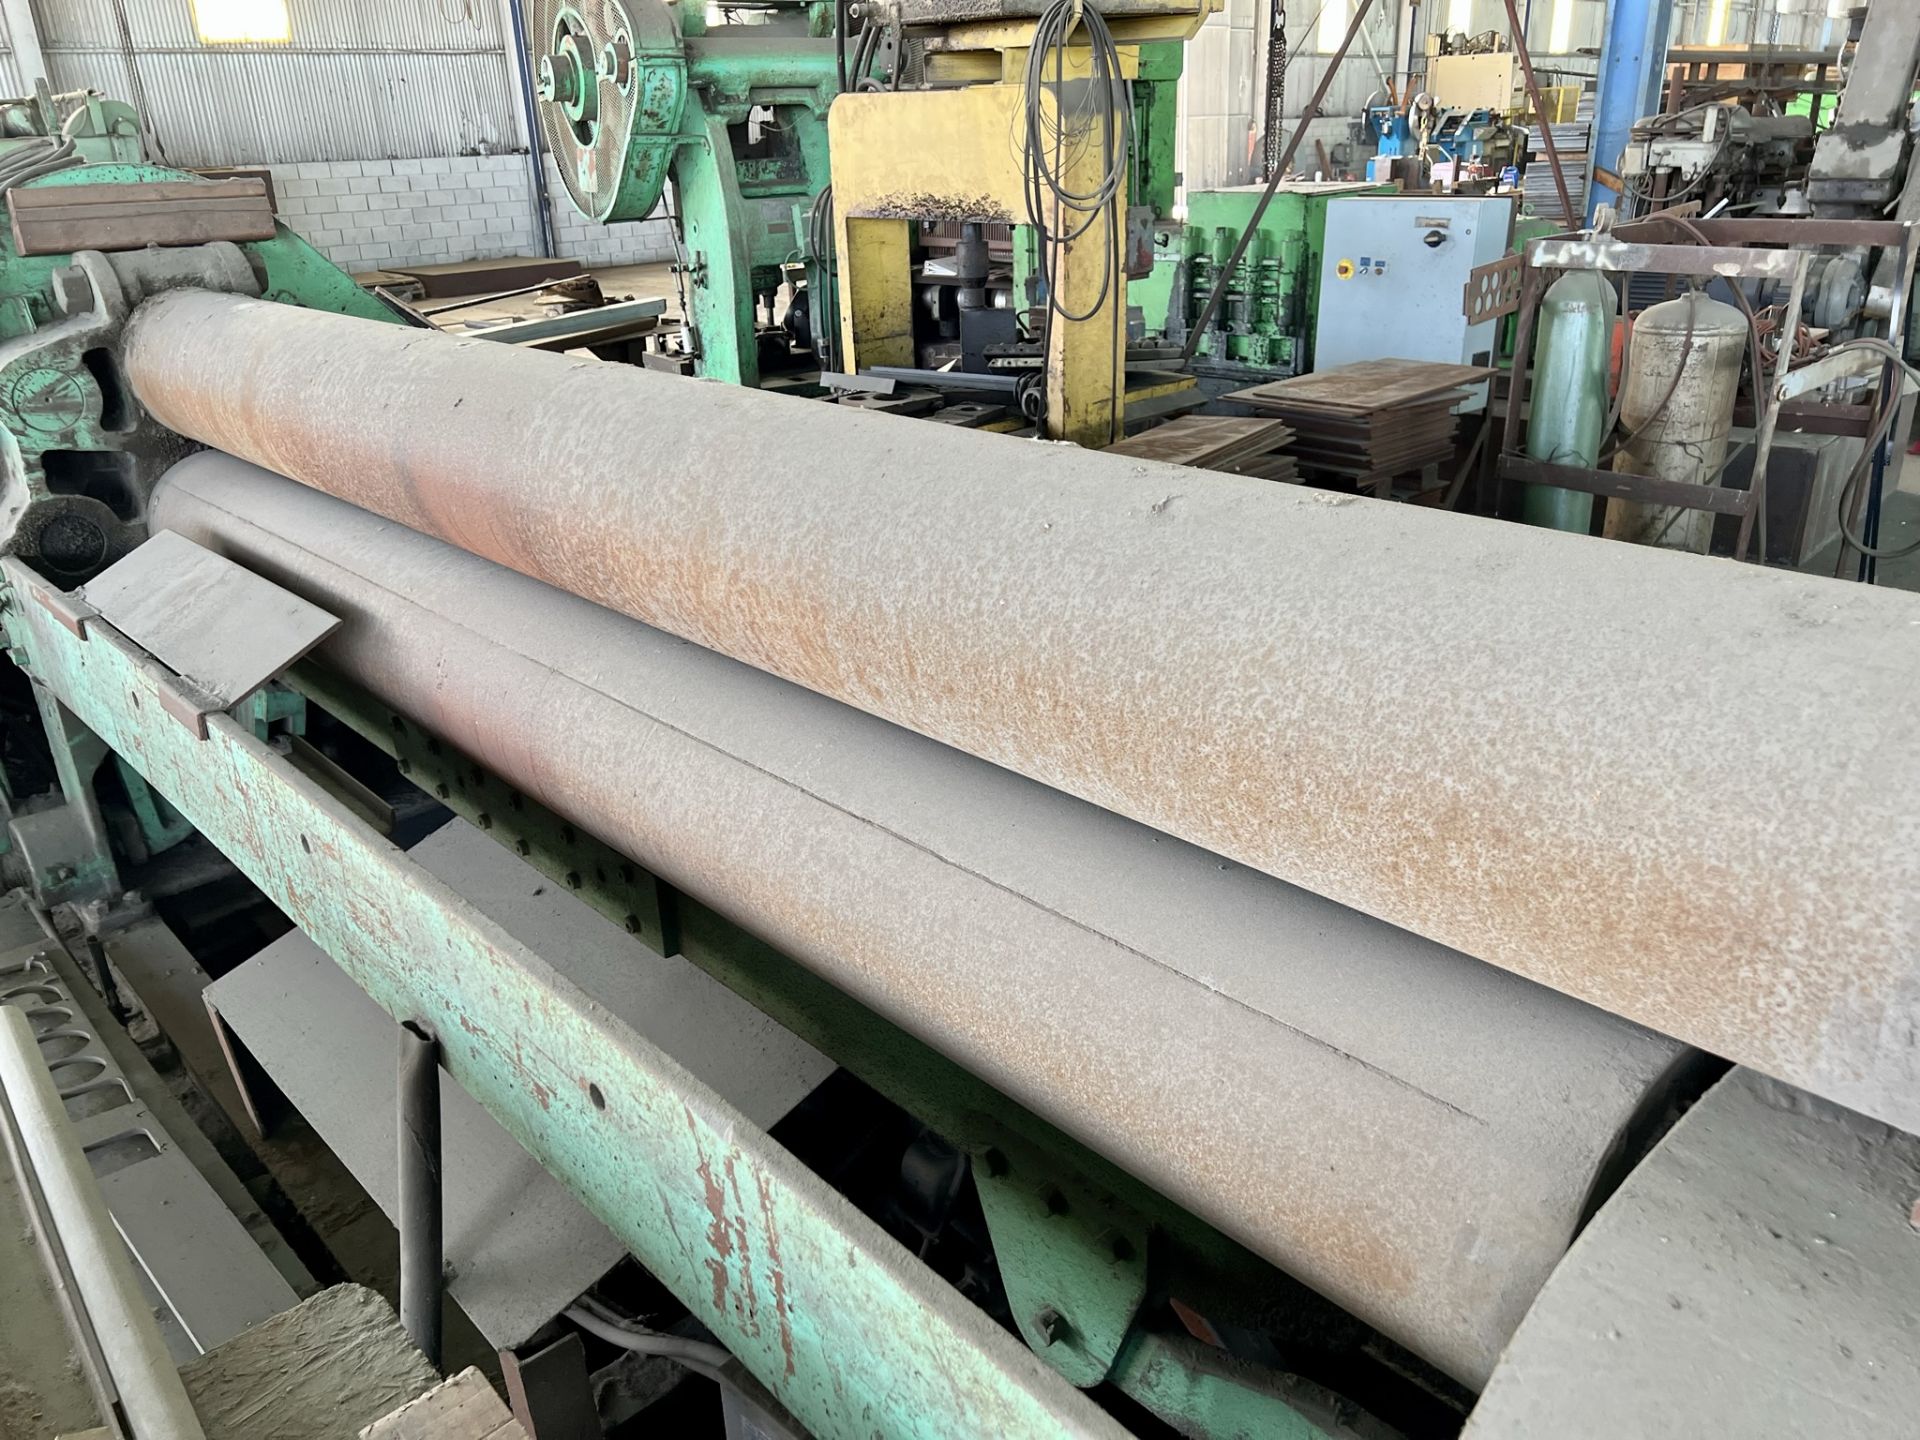 POPE 10' NO. 4 PINCH TYPE PLATE ROLL, CAPACITY: 1" X 10', (3) ROLLS - Image 7 of 14